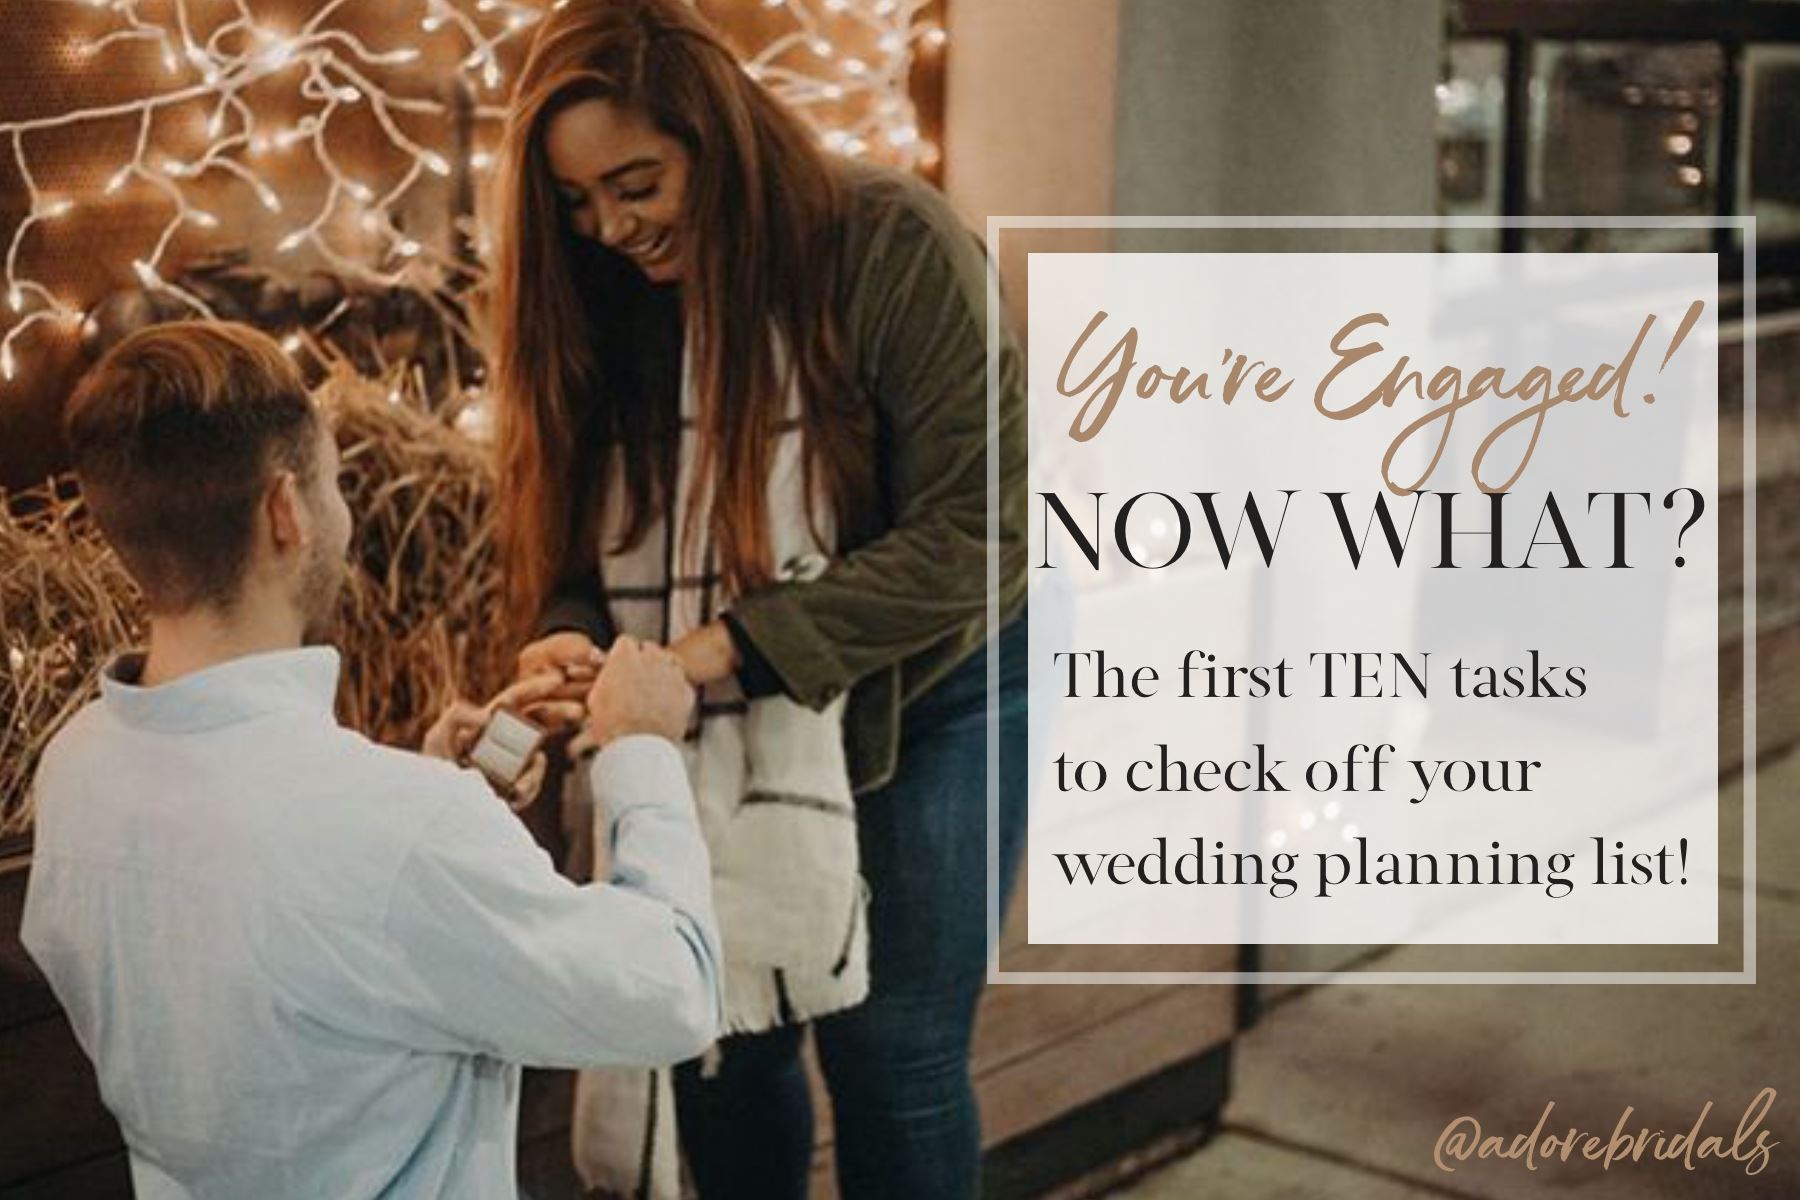 You&#39;re engaged, now what? The first 10 wedding planning tasks to check off your list!. Desktop Image